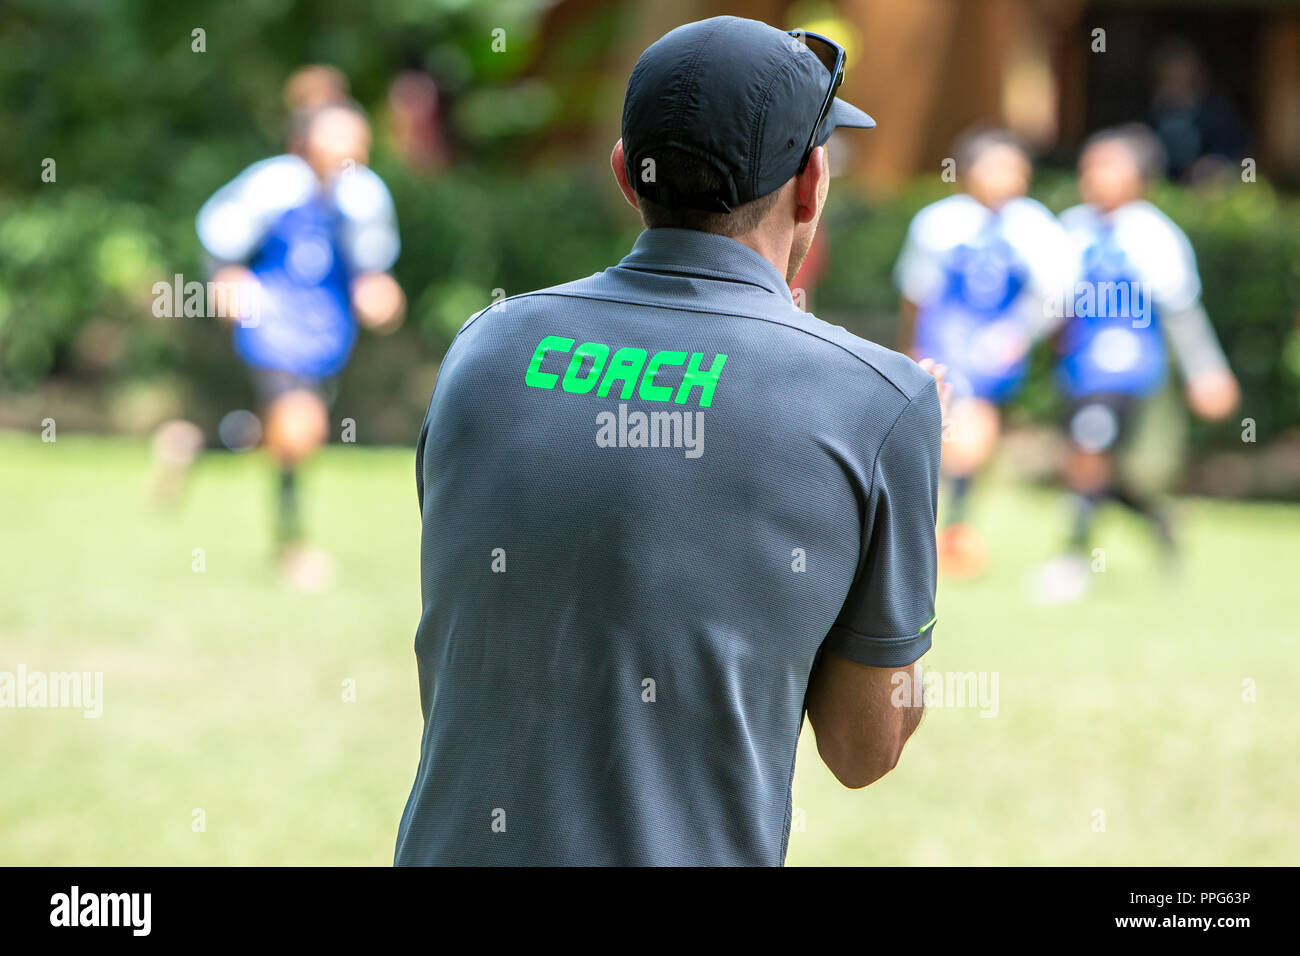 Male soccer or football coach in gray shirt with word COACH written on back, standing on the sideline watching his team play, good for sport or coachi Stock Photo